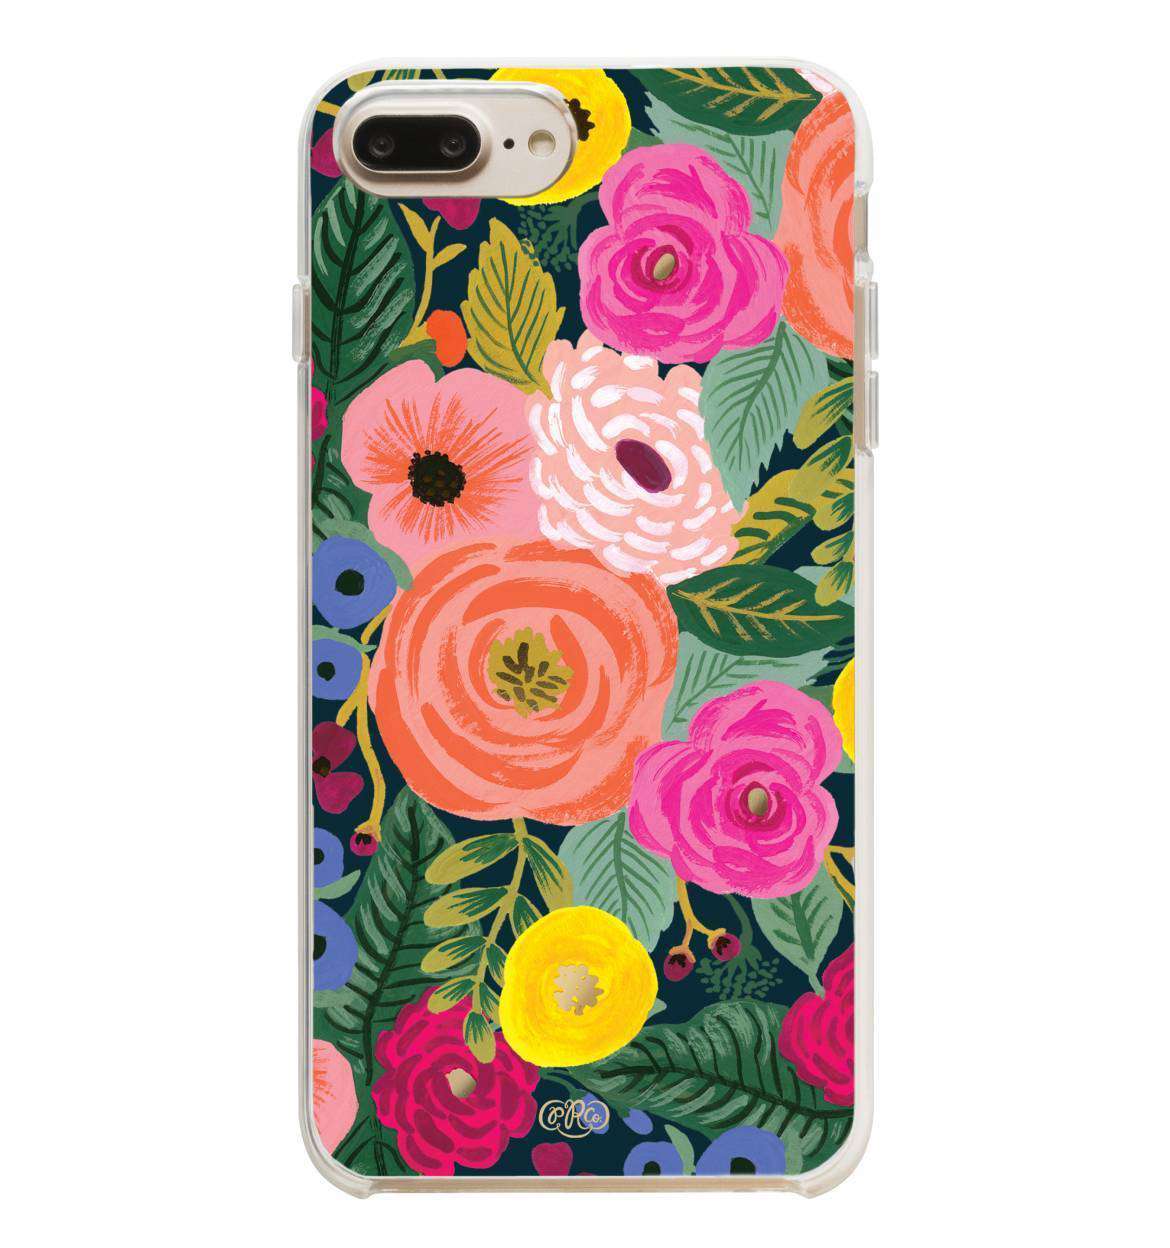 Women's pink and green floral iPhone clear cover